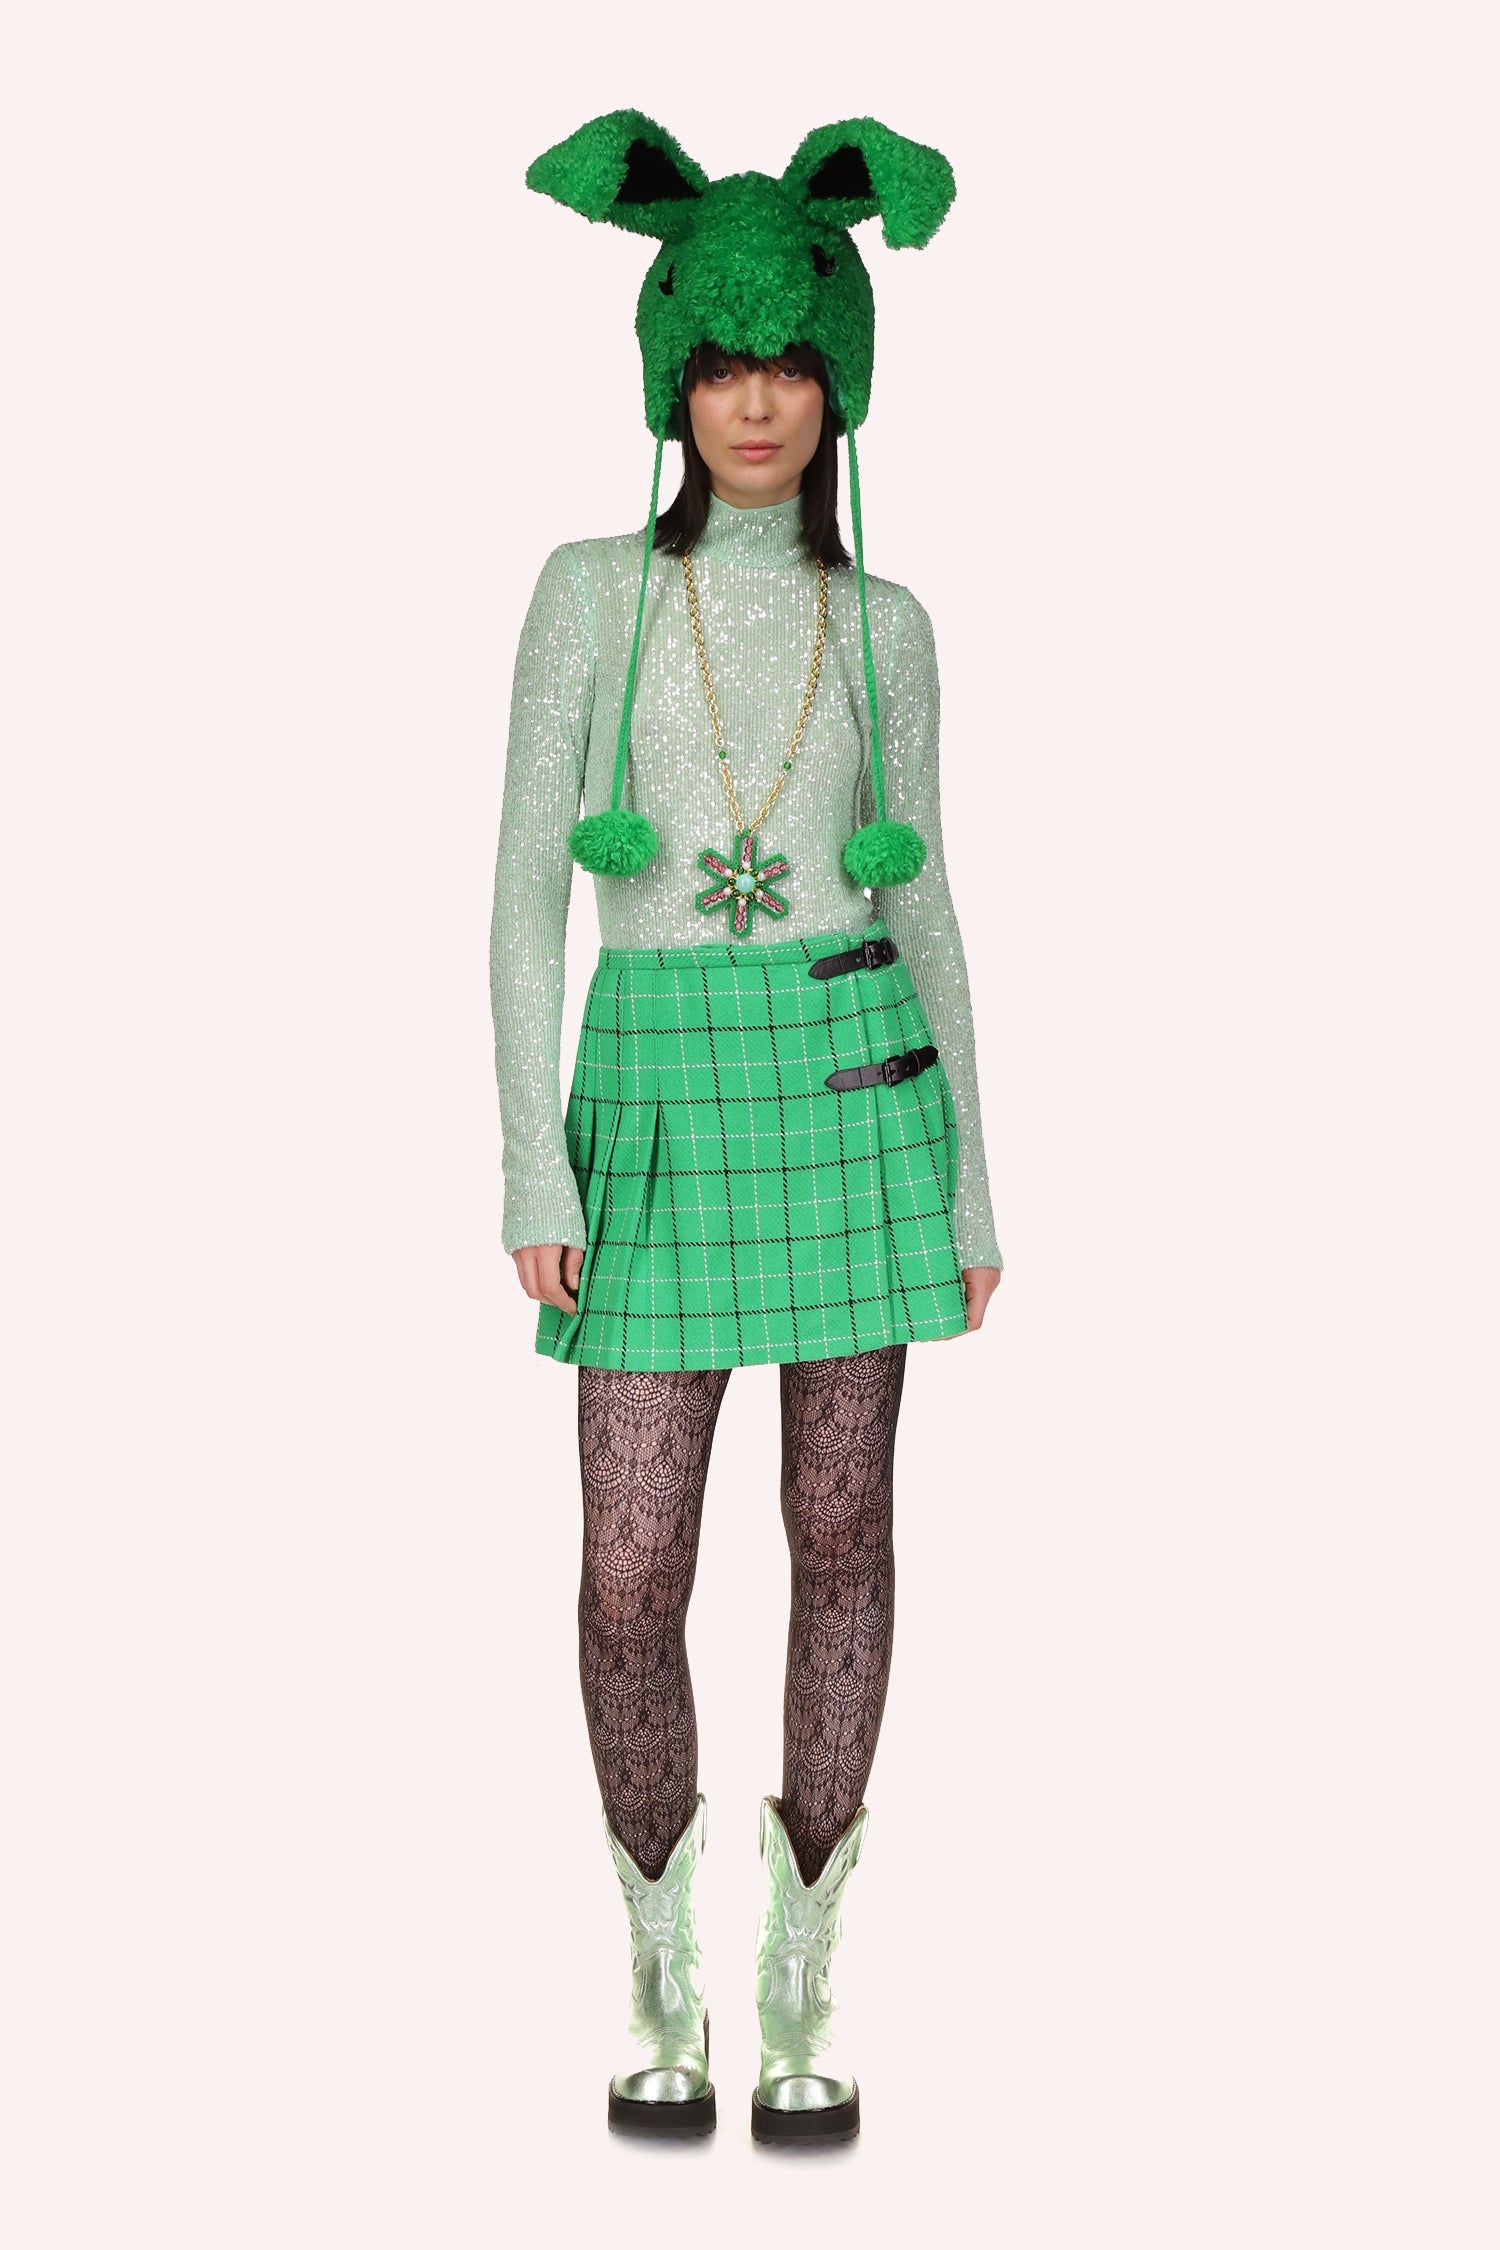 Irish green Mini skirt, dark green and white squares patterns, left side with 2-black buckles